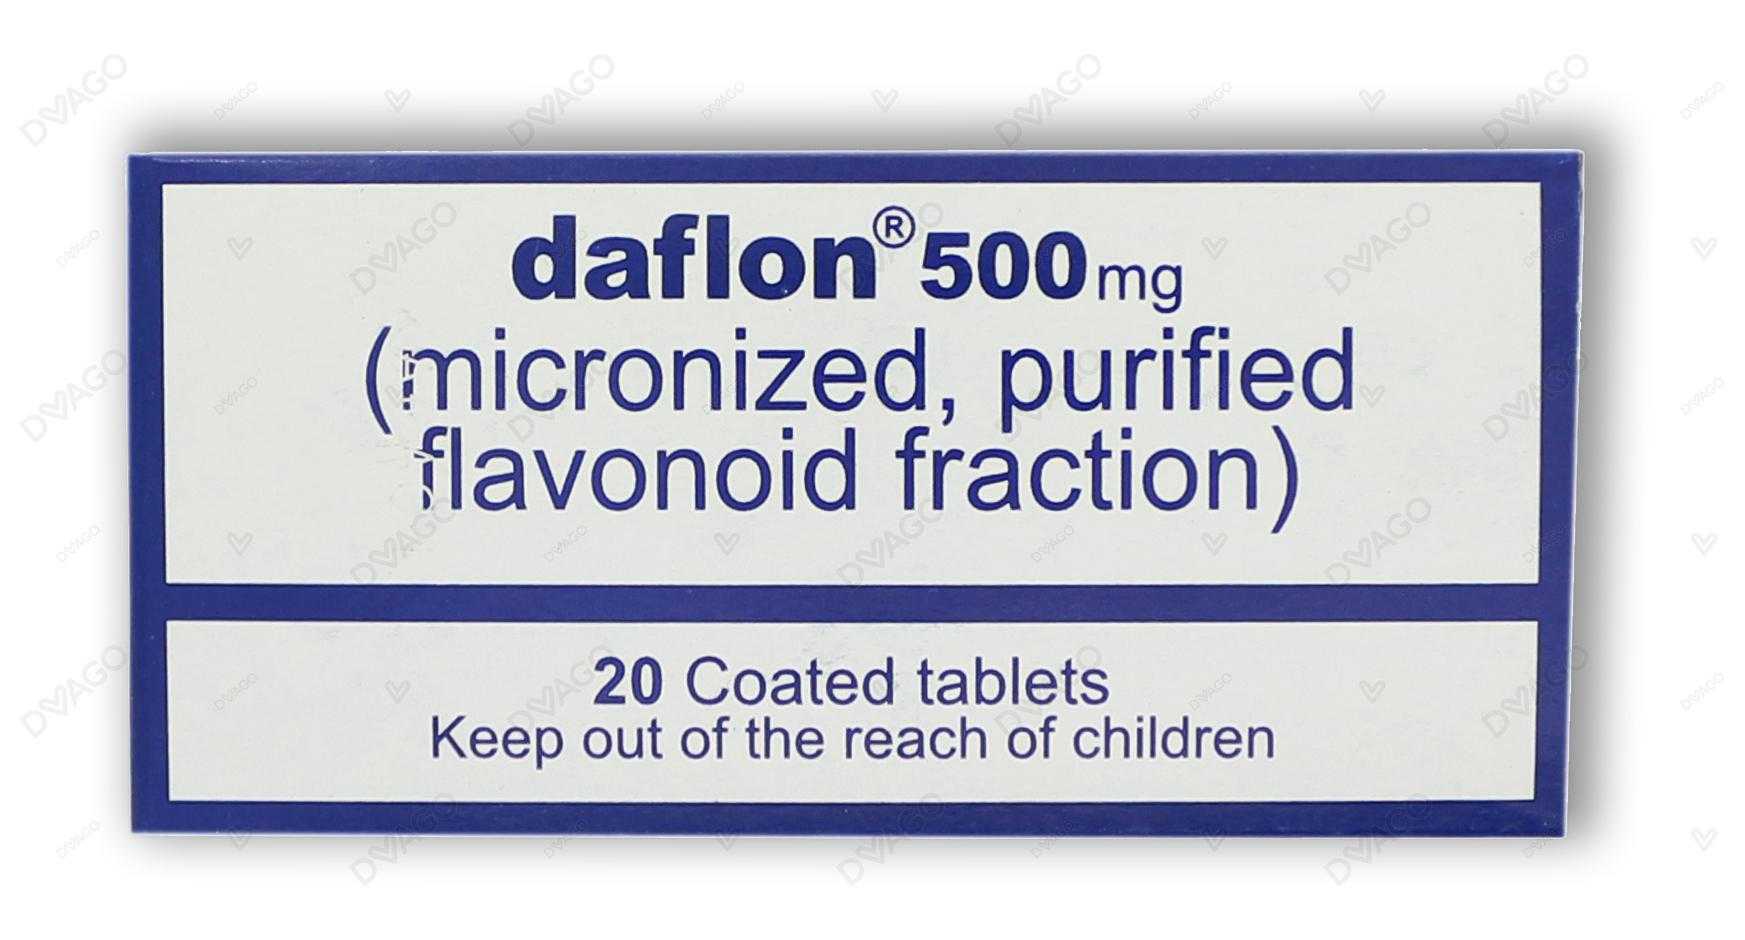 Daflon 1000mg Tablet: View Uses, Side Effects, Price and Substitutes